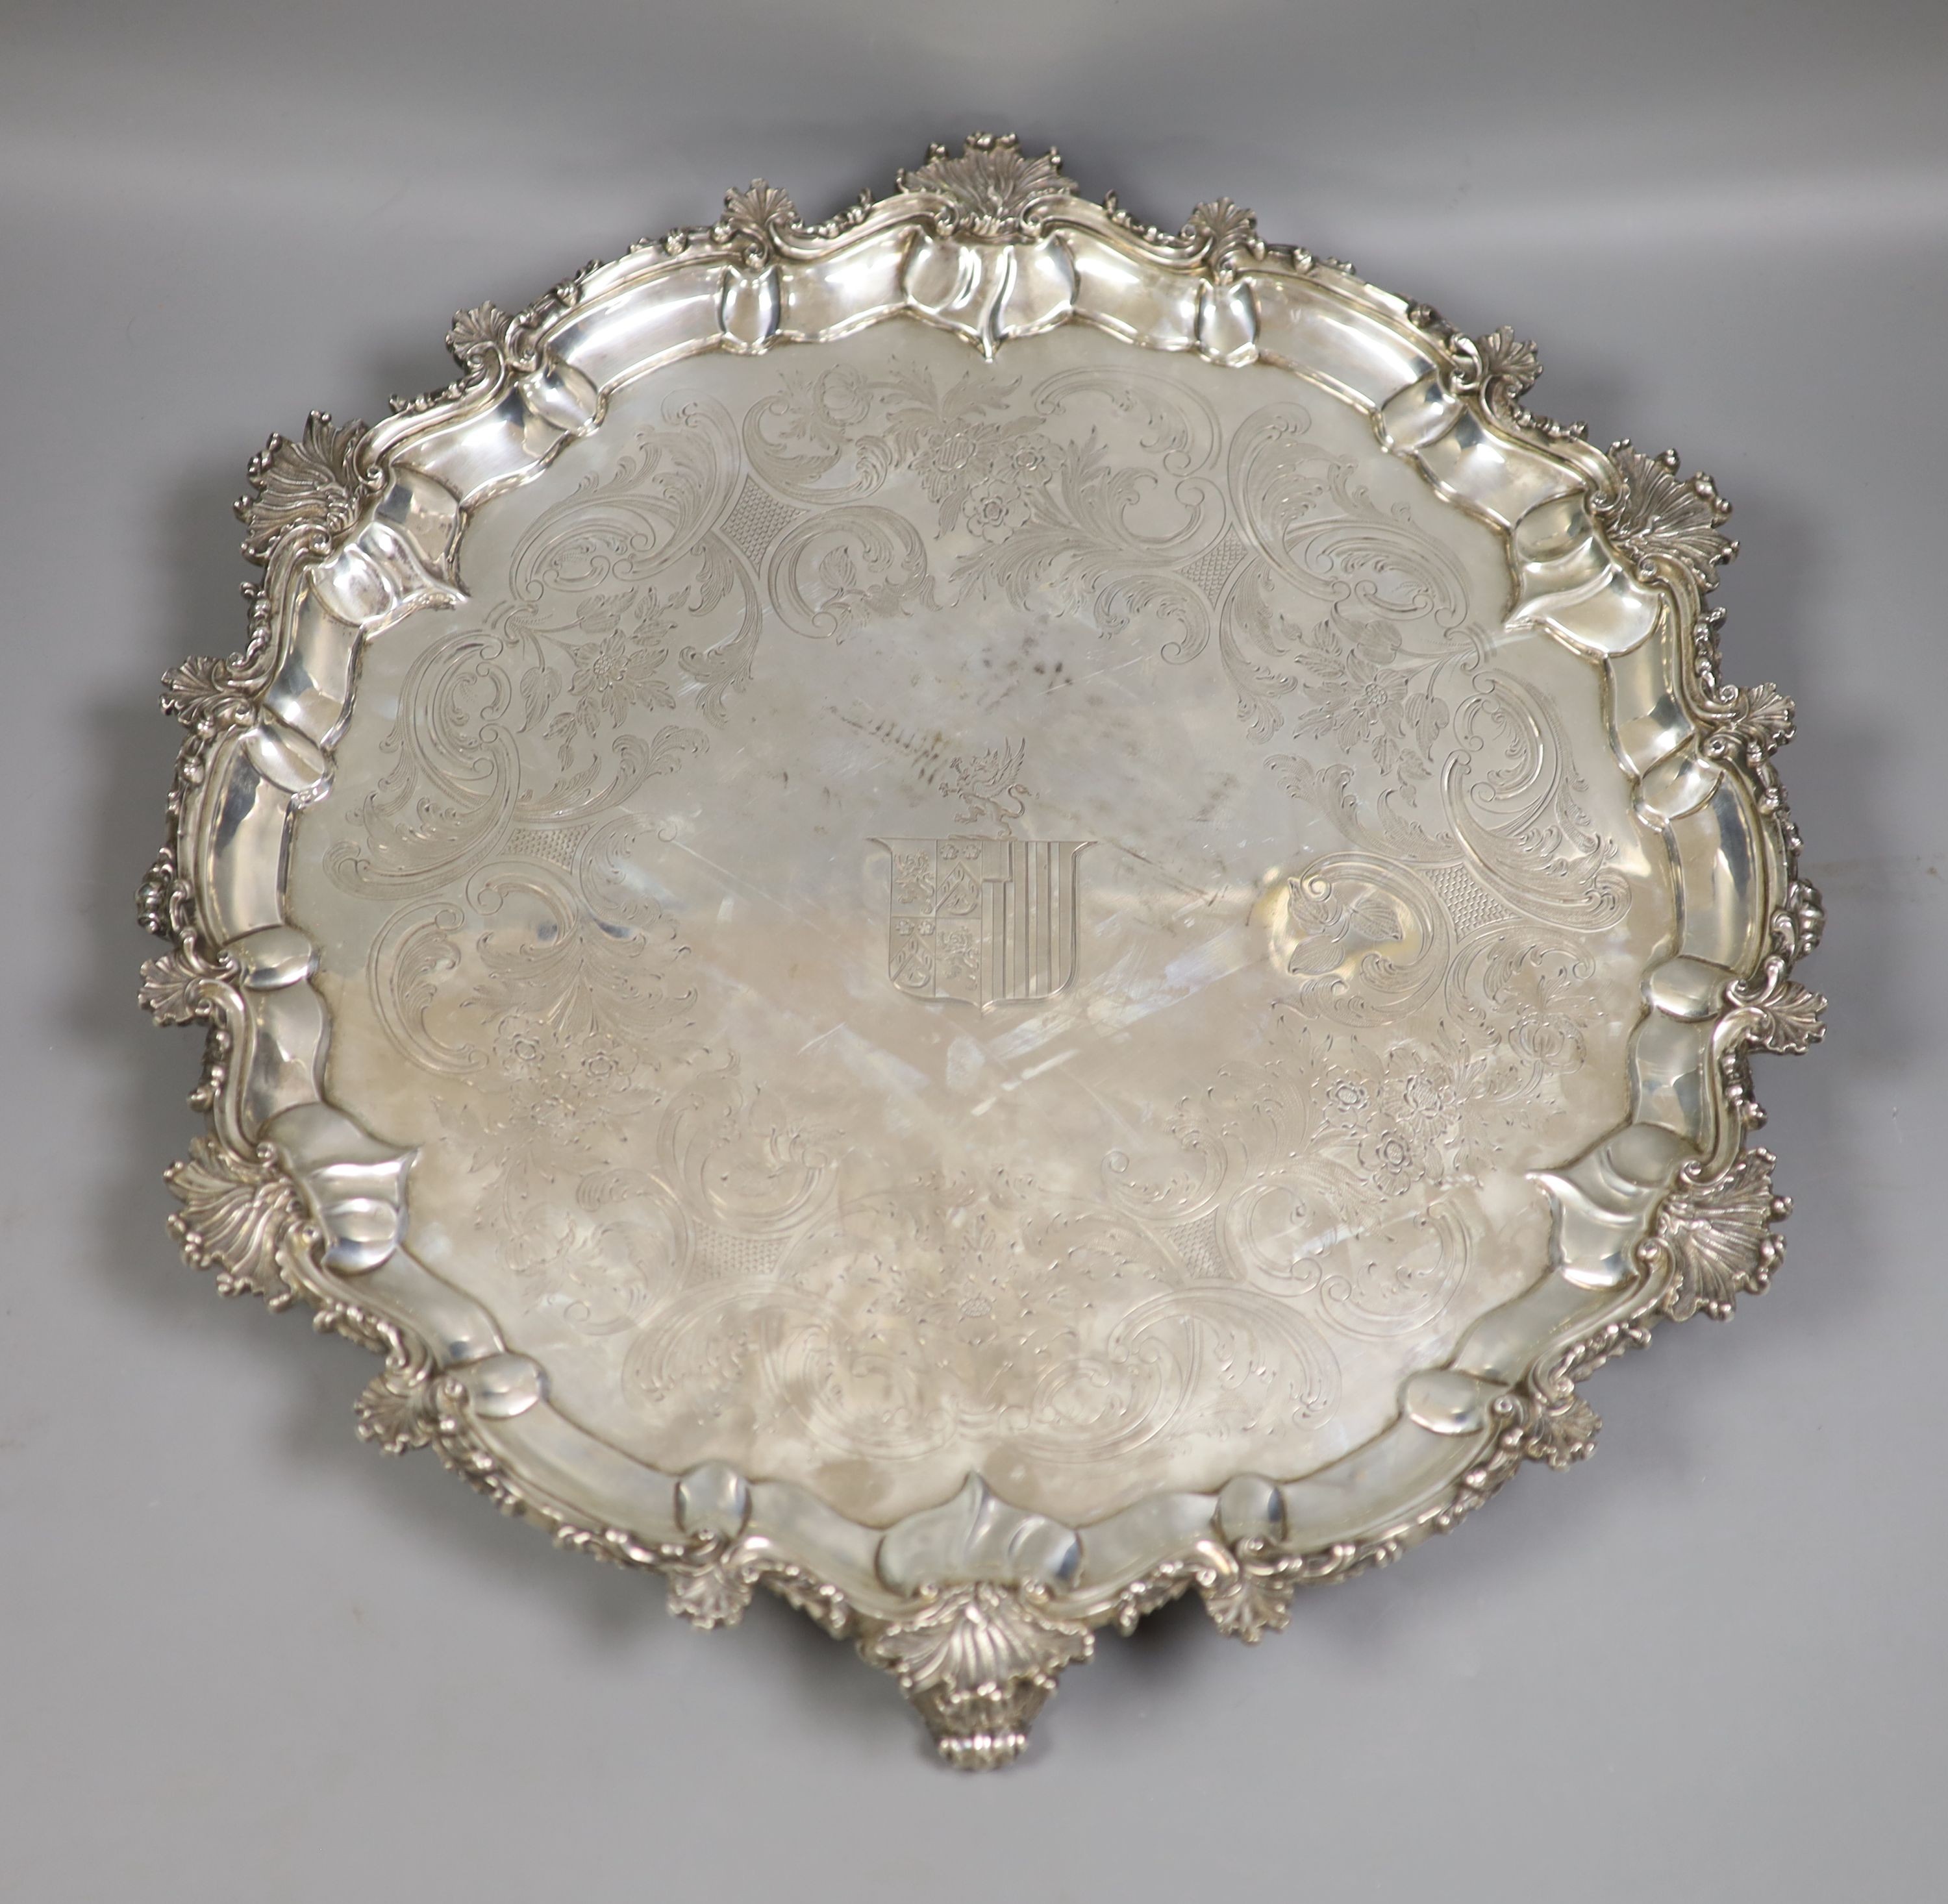 WITHDRAWN A George III large engraved silver salver, by Peter & William Bateman, London, 1809, with shell and scroll border, engraved armorial and later engraved inscription verso, (repair), diameter 46.3cm, 71oz.       